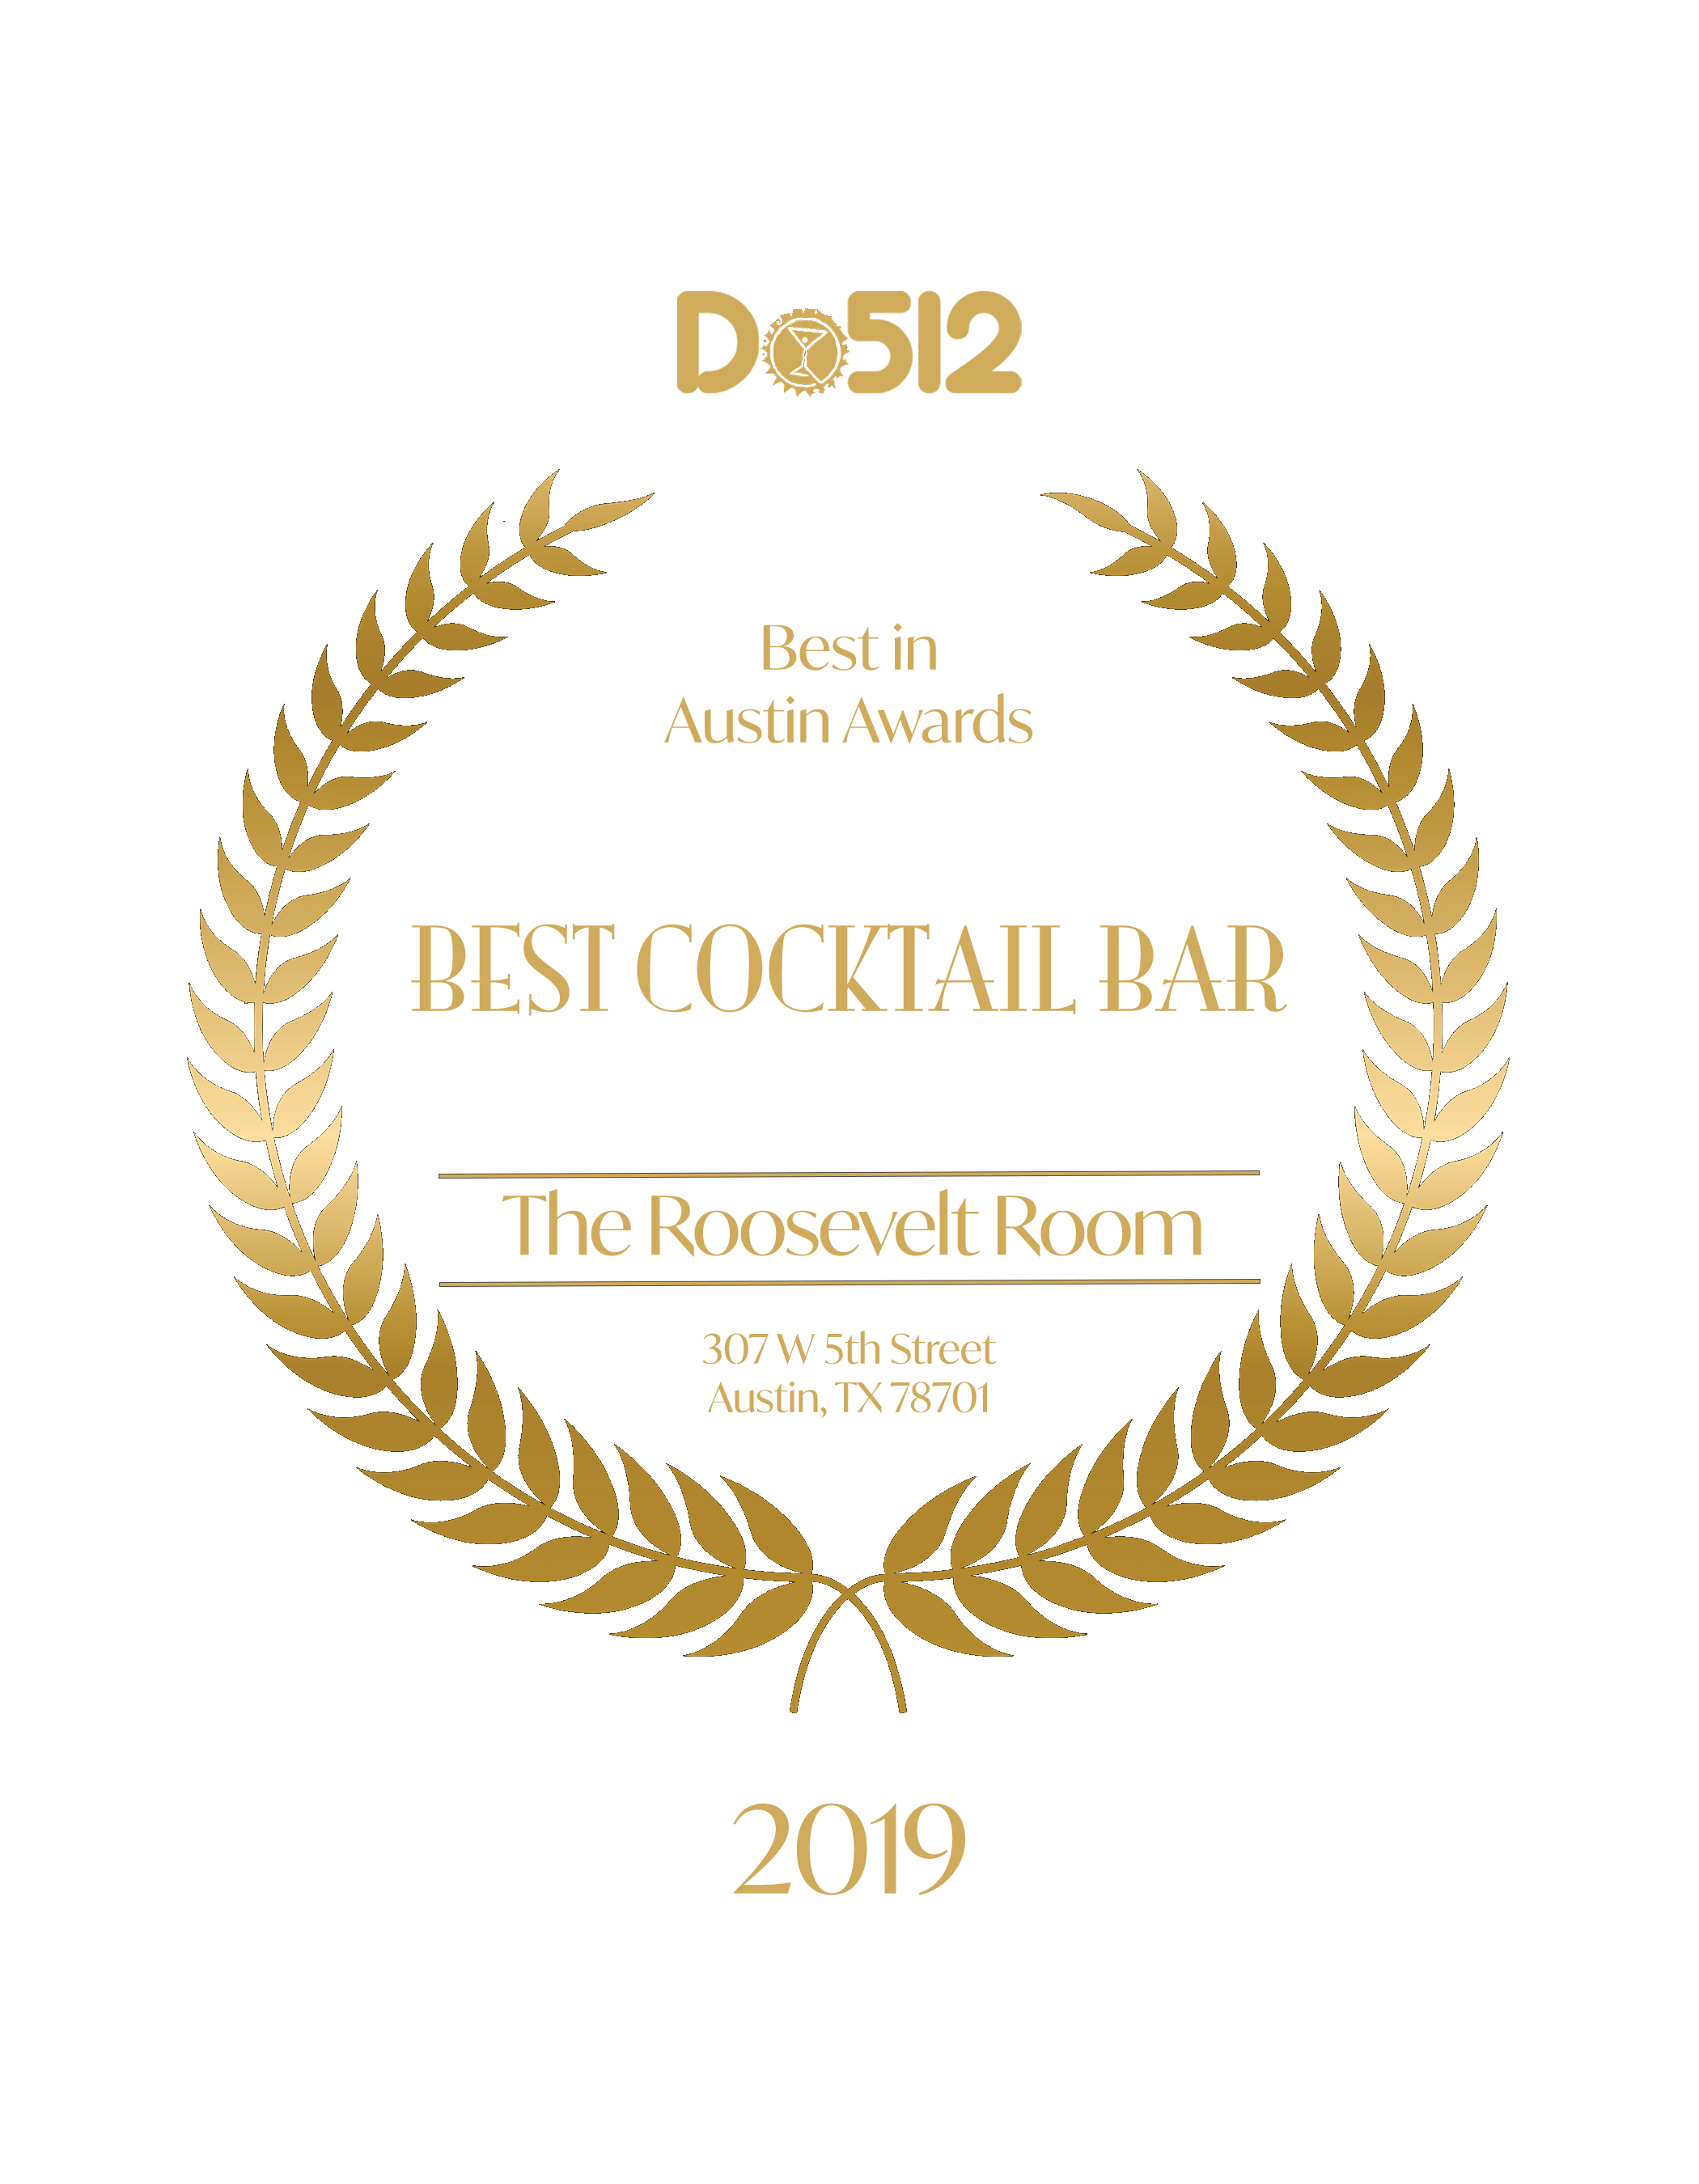 Do512 Best Cocktail Bar 2019 Plaque 7x9 (No Background).png